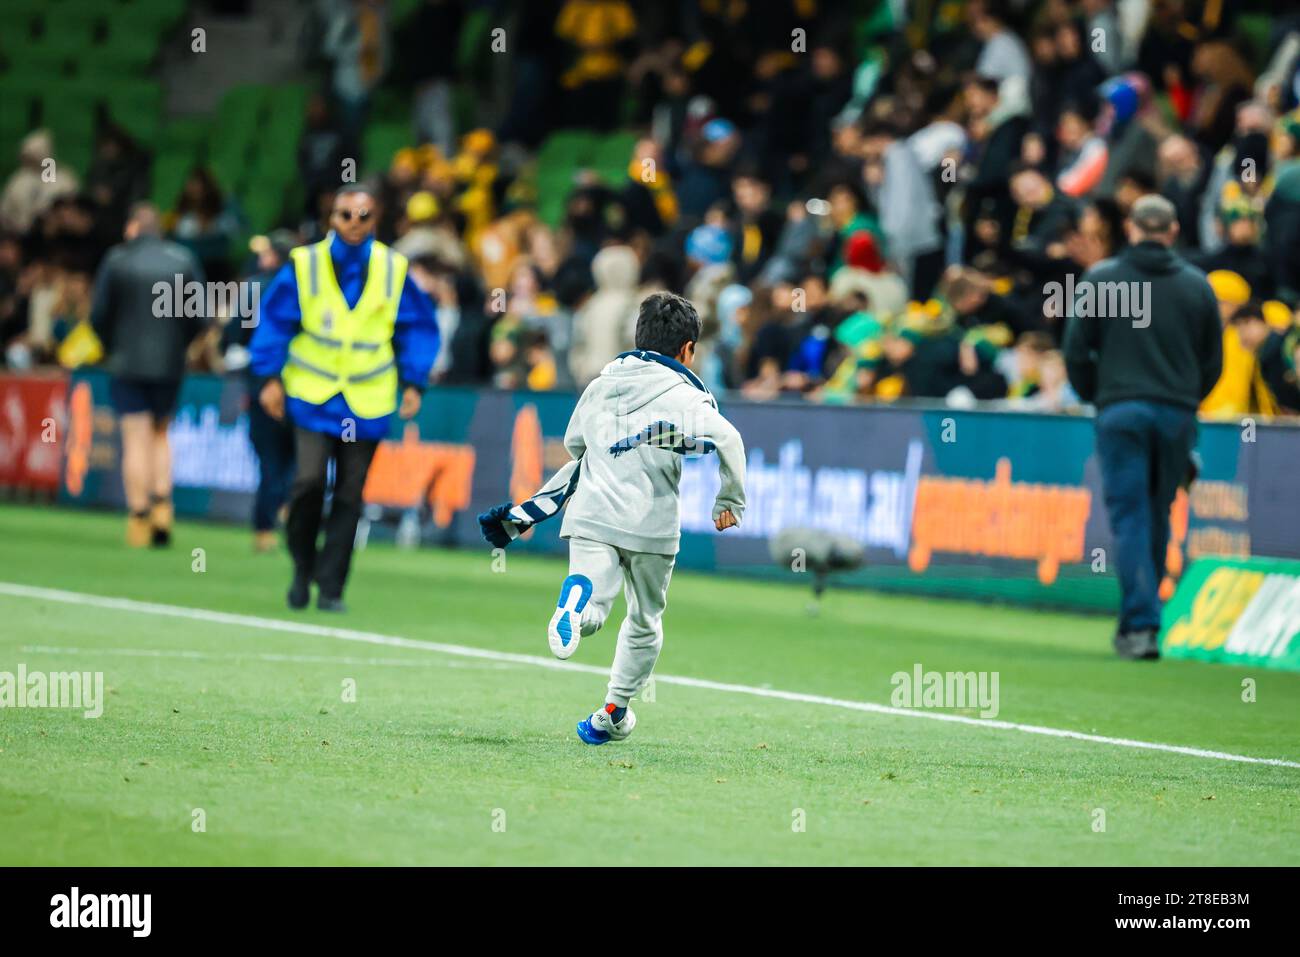 MELBOURNE, AUSTRALIA - NOVEMBER 16: A child invades the pitch after the 2026 FIFA World Cup Qualifier match between Australia Socceroos and Bangladesh Stock Photo